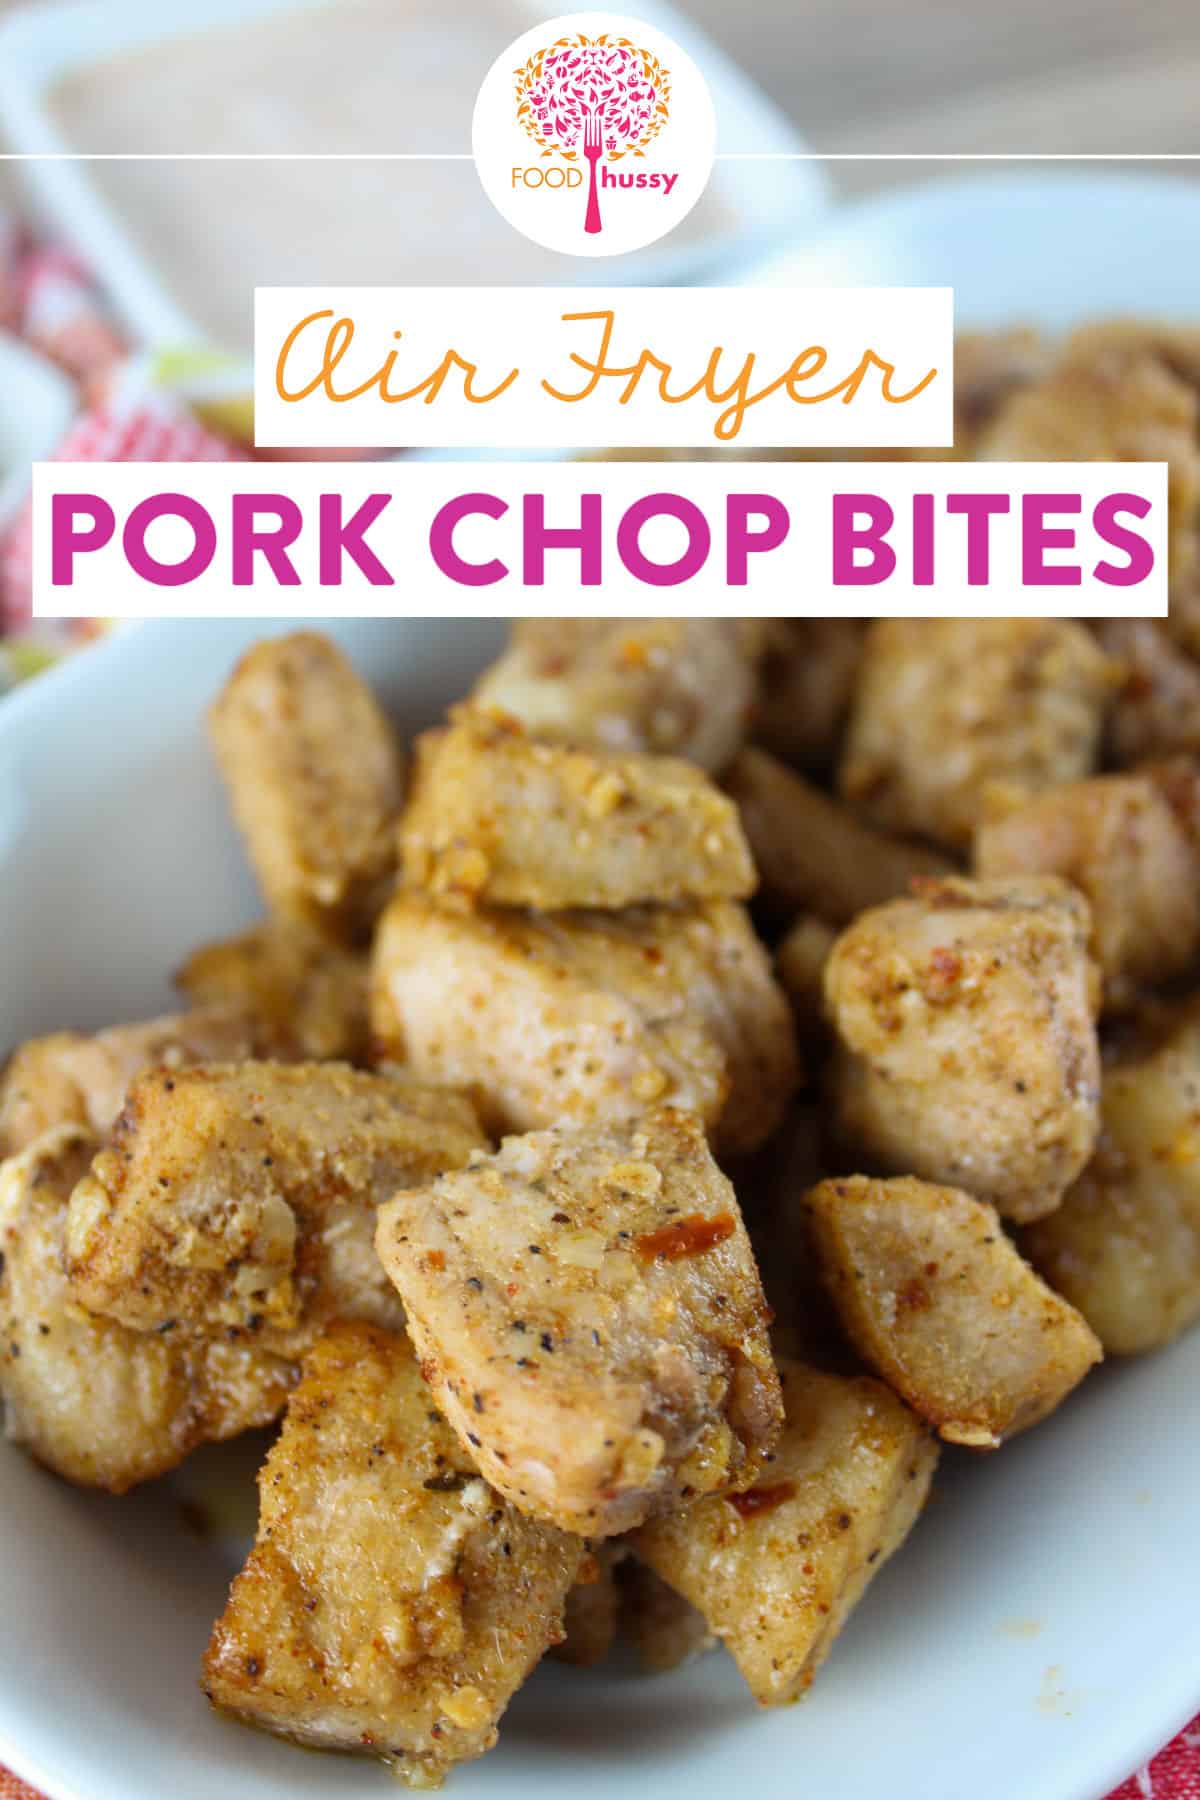 These Air Fryer Pork Chop Bites are juicy and tender! Spicy sweet flavors mix together and then finish it off with a salsa cream dipping sauce. The best part - it's done in 7 minutes of cooking time! via @foodhussy